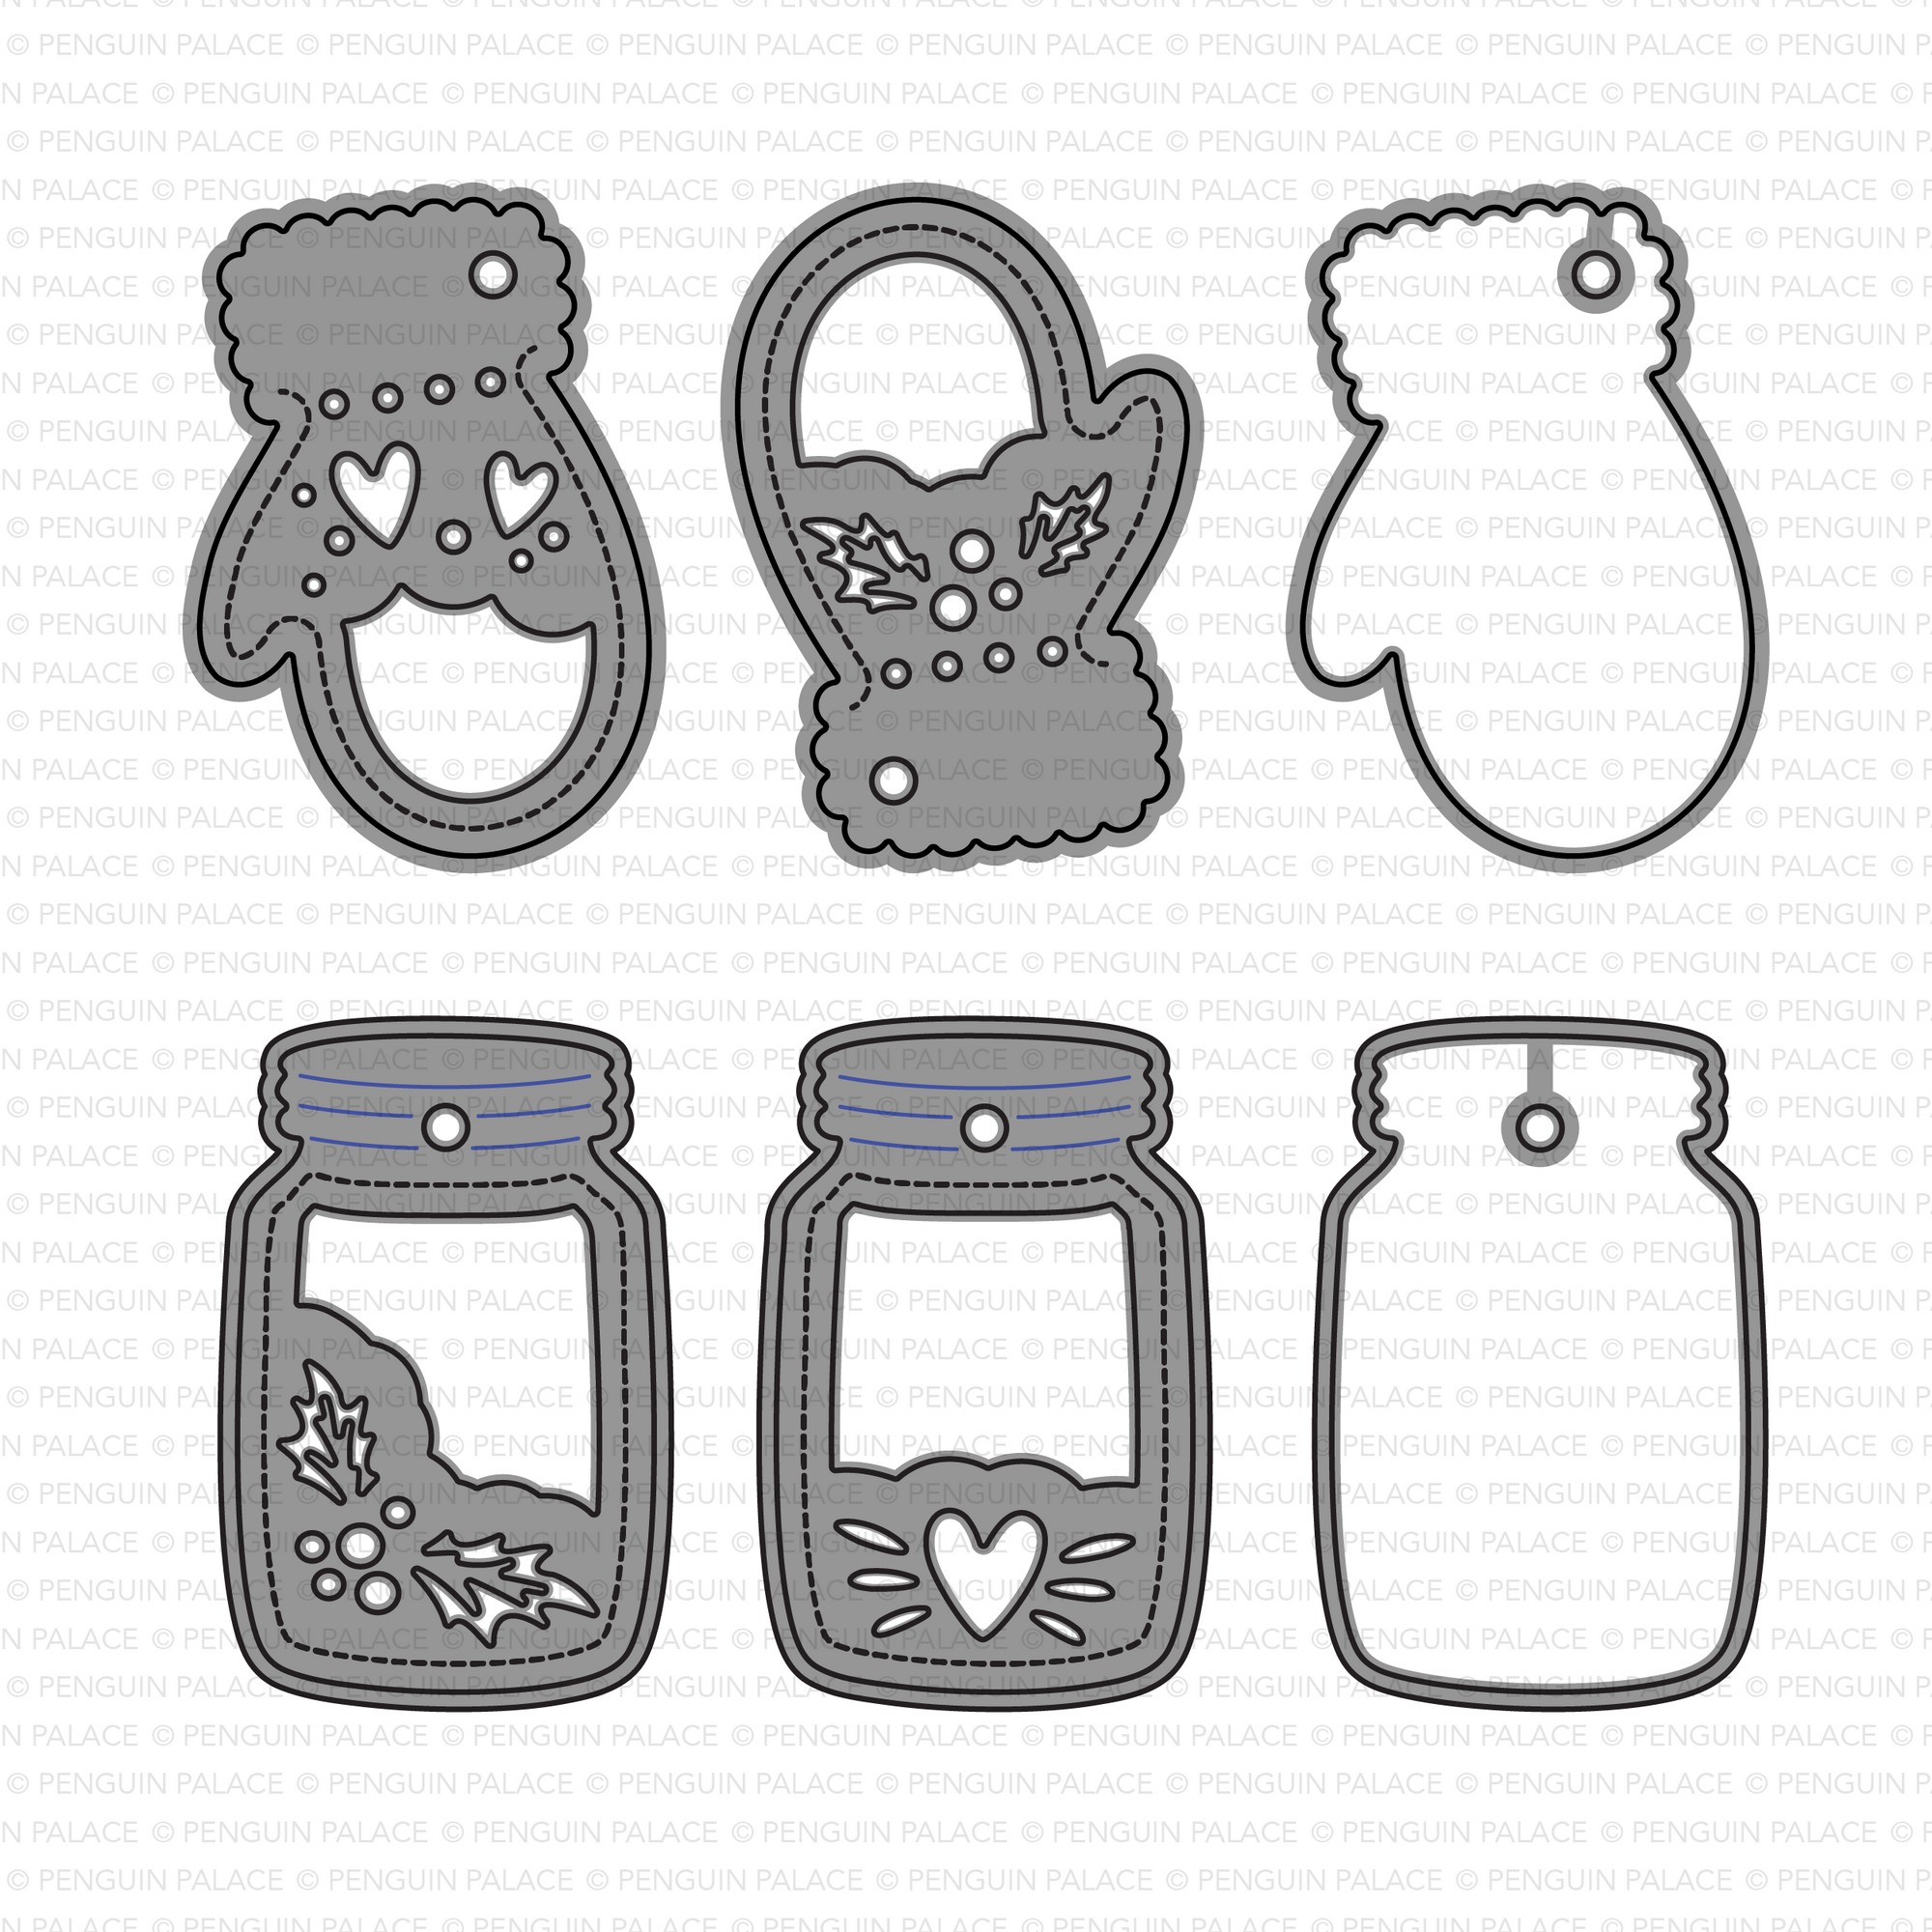 Mason Jars and Mittens Shaker Tags Stand-Alone Dies